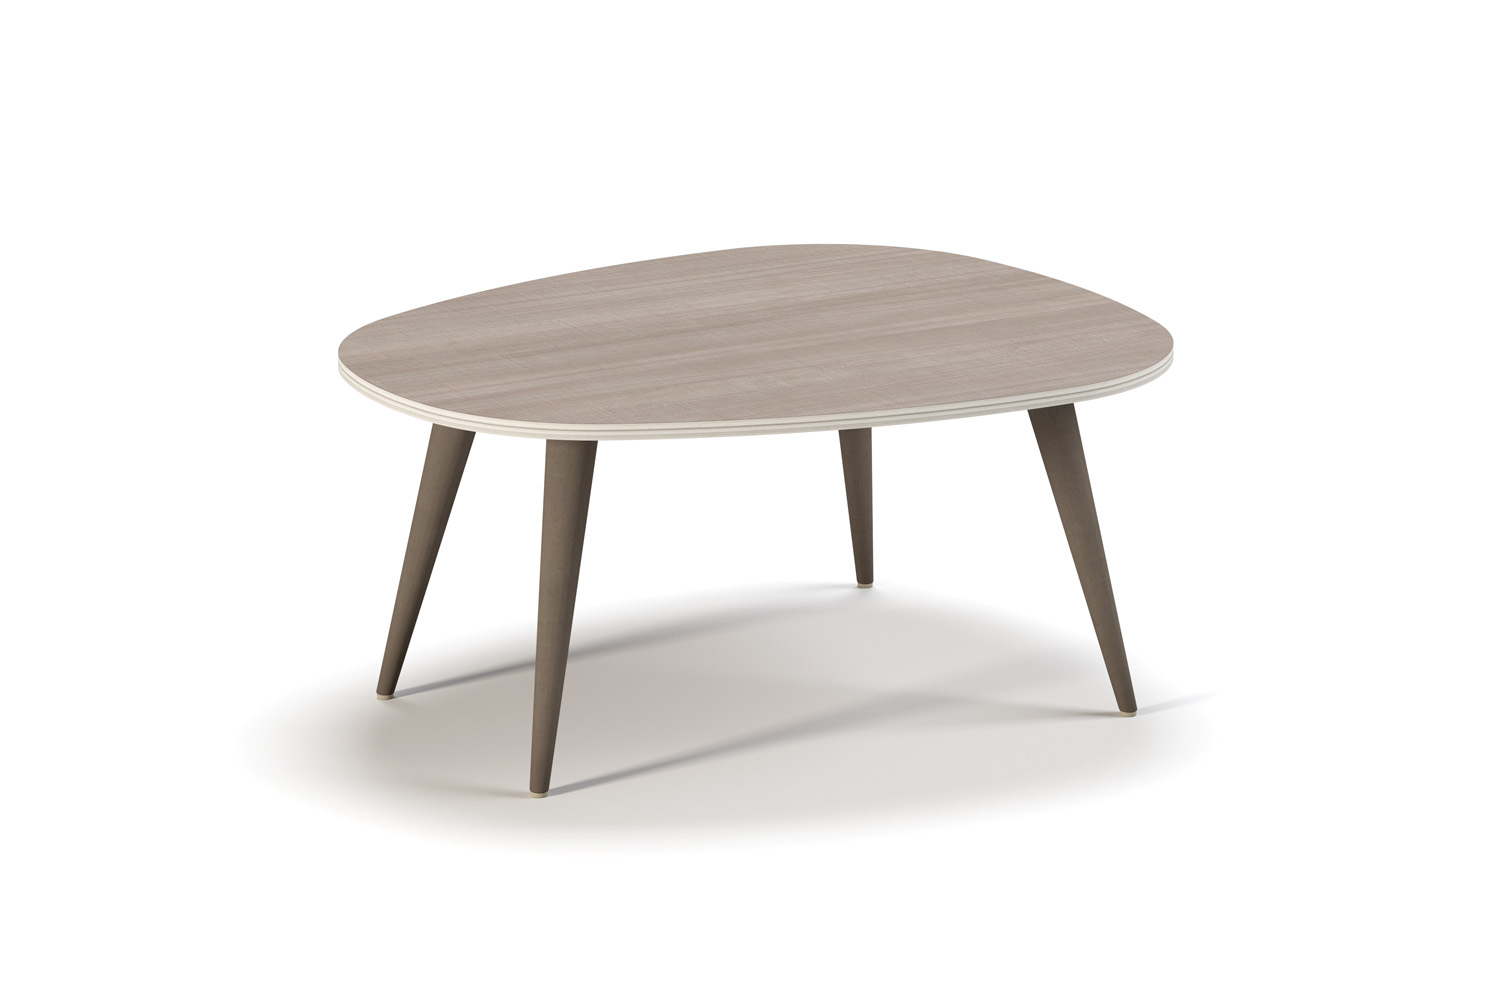 Hermosa Occasional Table 36x30 Pebble Top Wood Legs